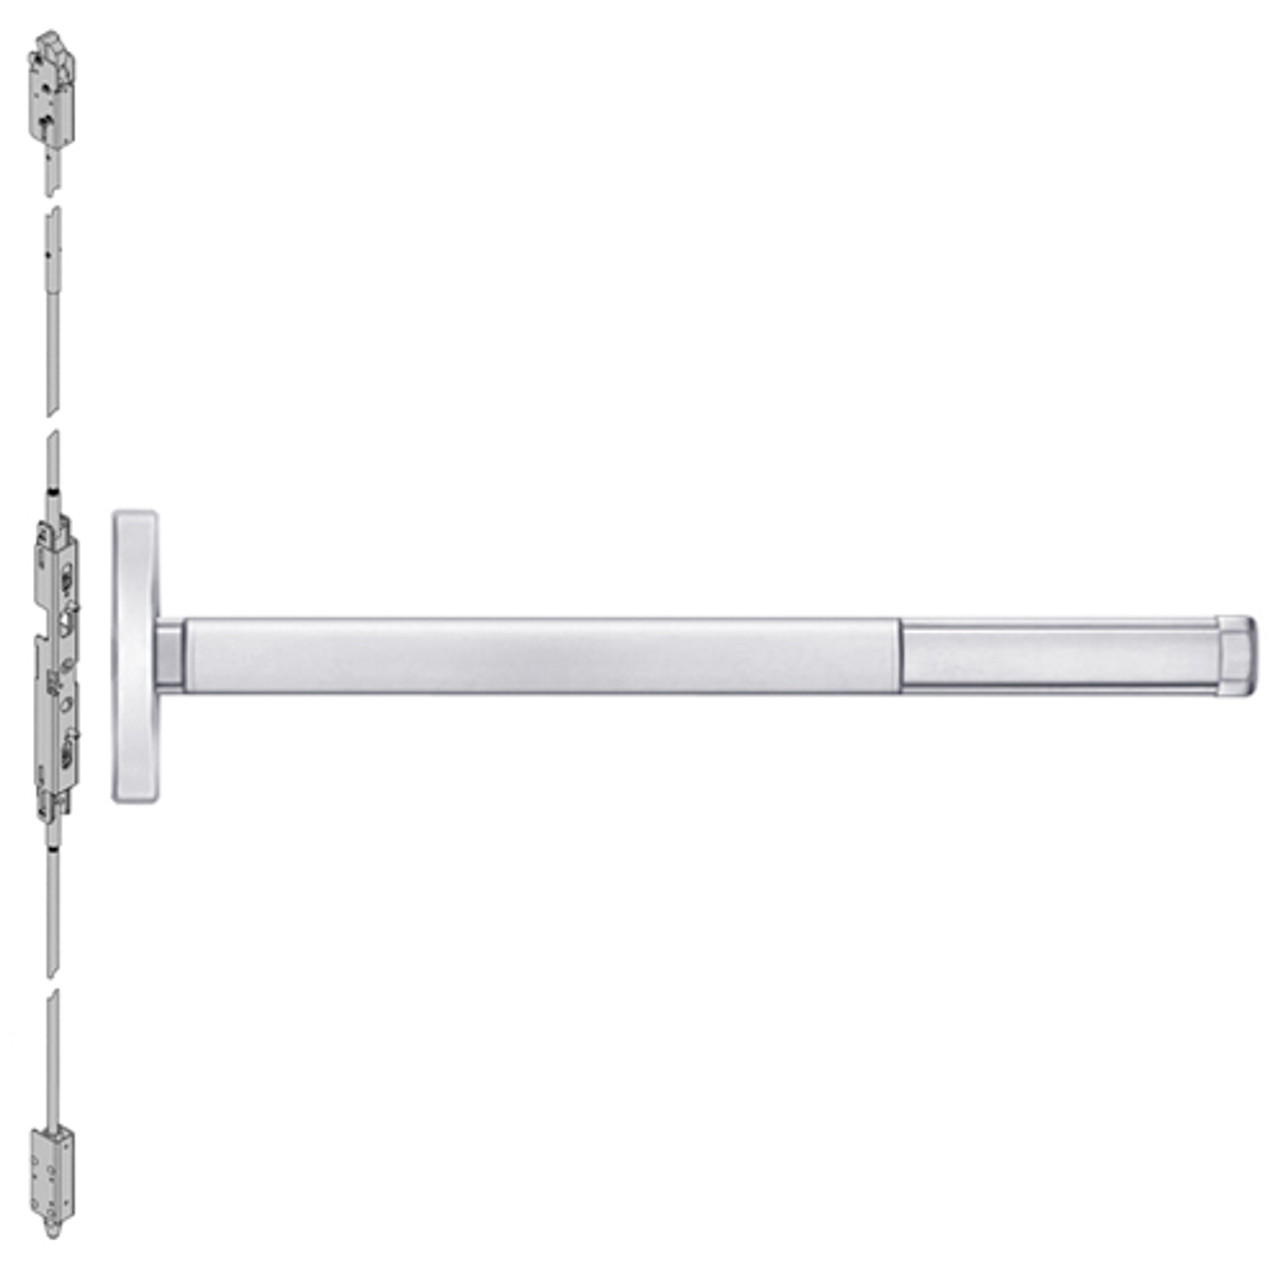 DE2603-625-36 PHI 2600 Series Concealed Vertical Rod Exit Device with Delayed Egress Prepped for Key Retracts Latchbolt in Bright Chrome Finish